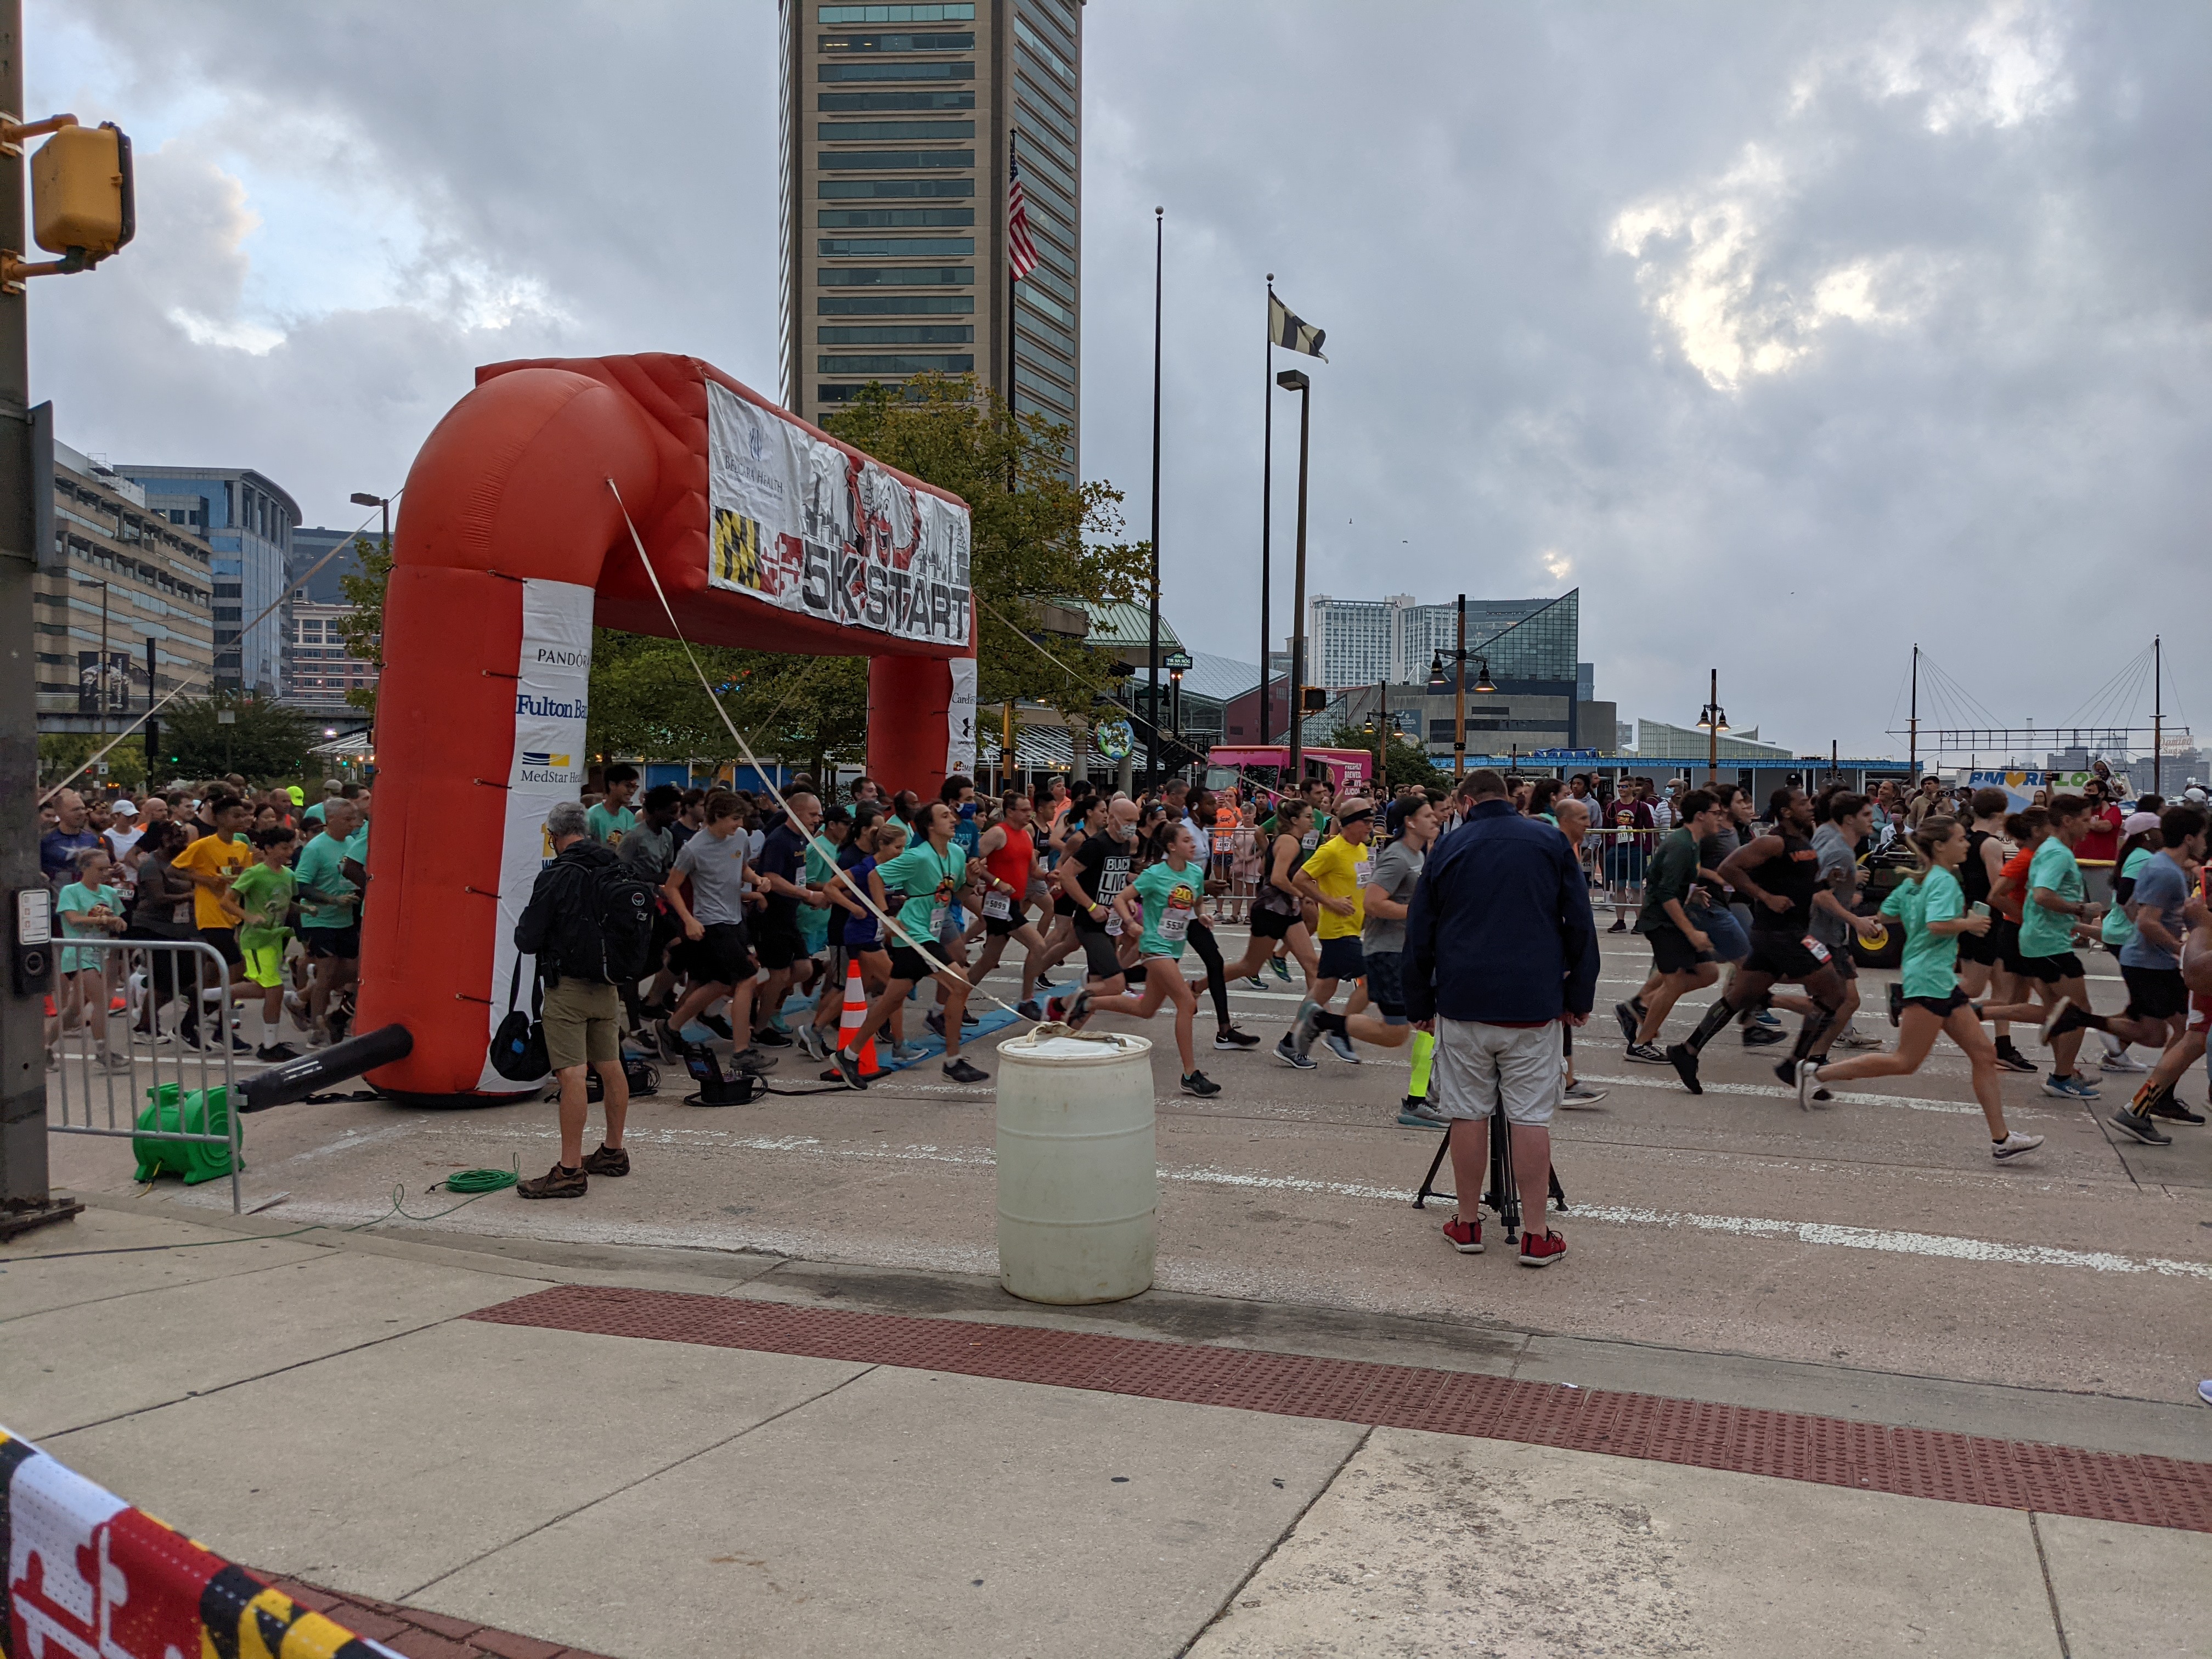 5K has started